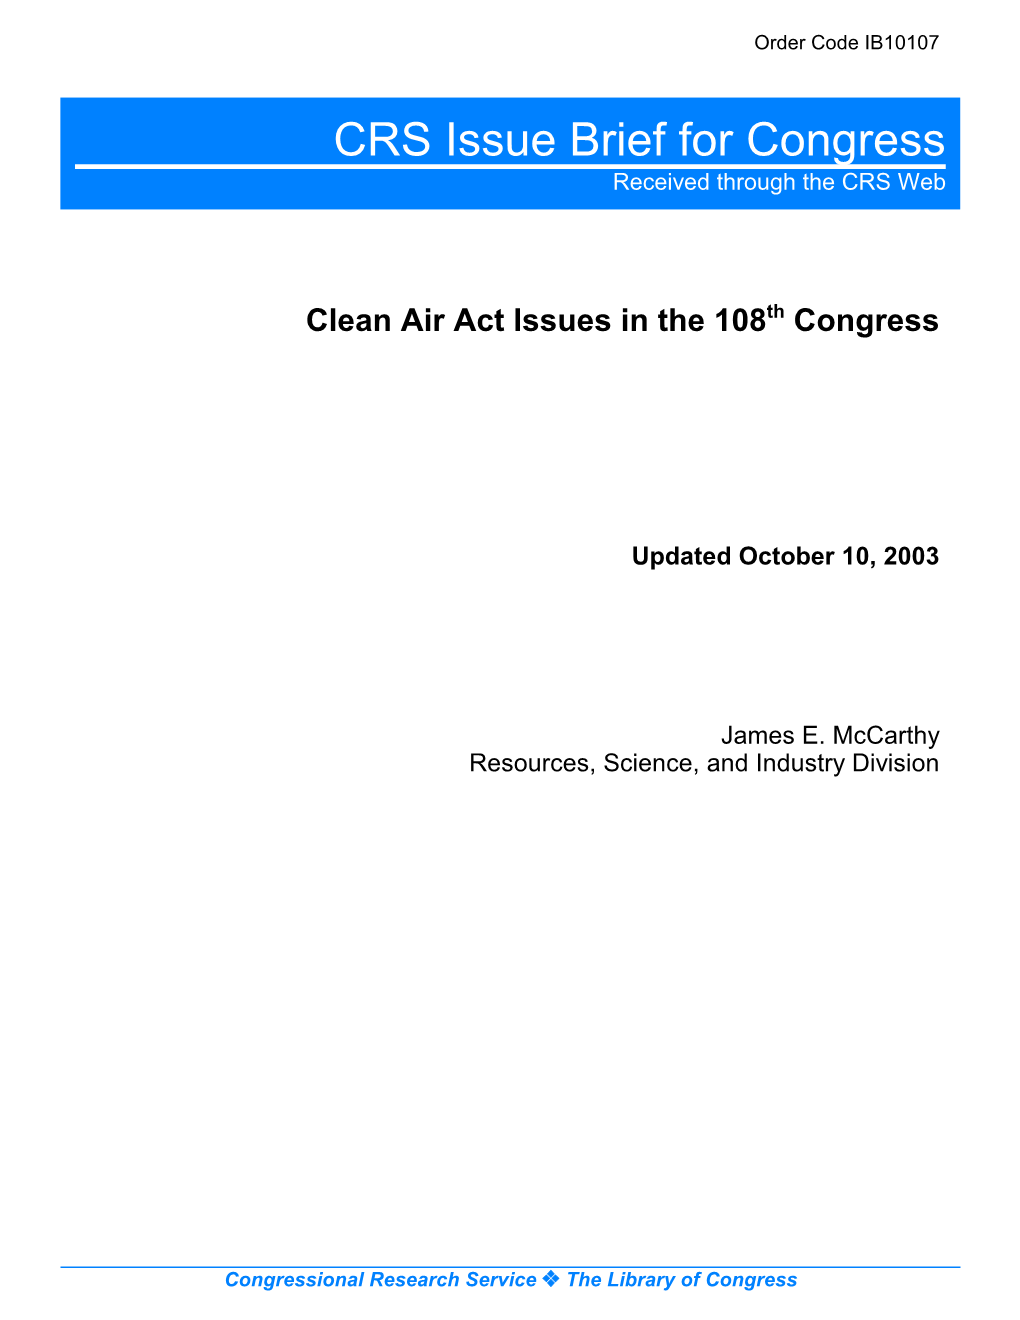 Clean Air Act Issues in the 108Th Congress